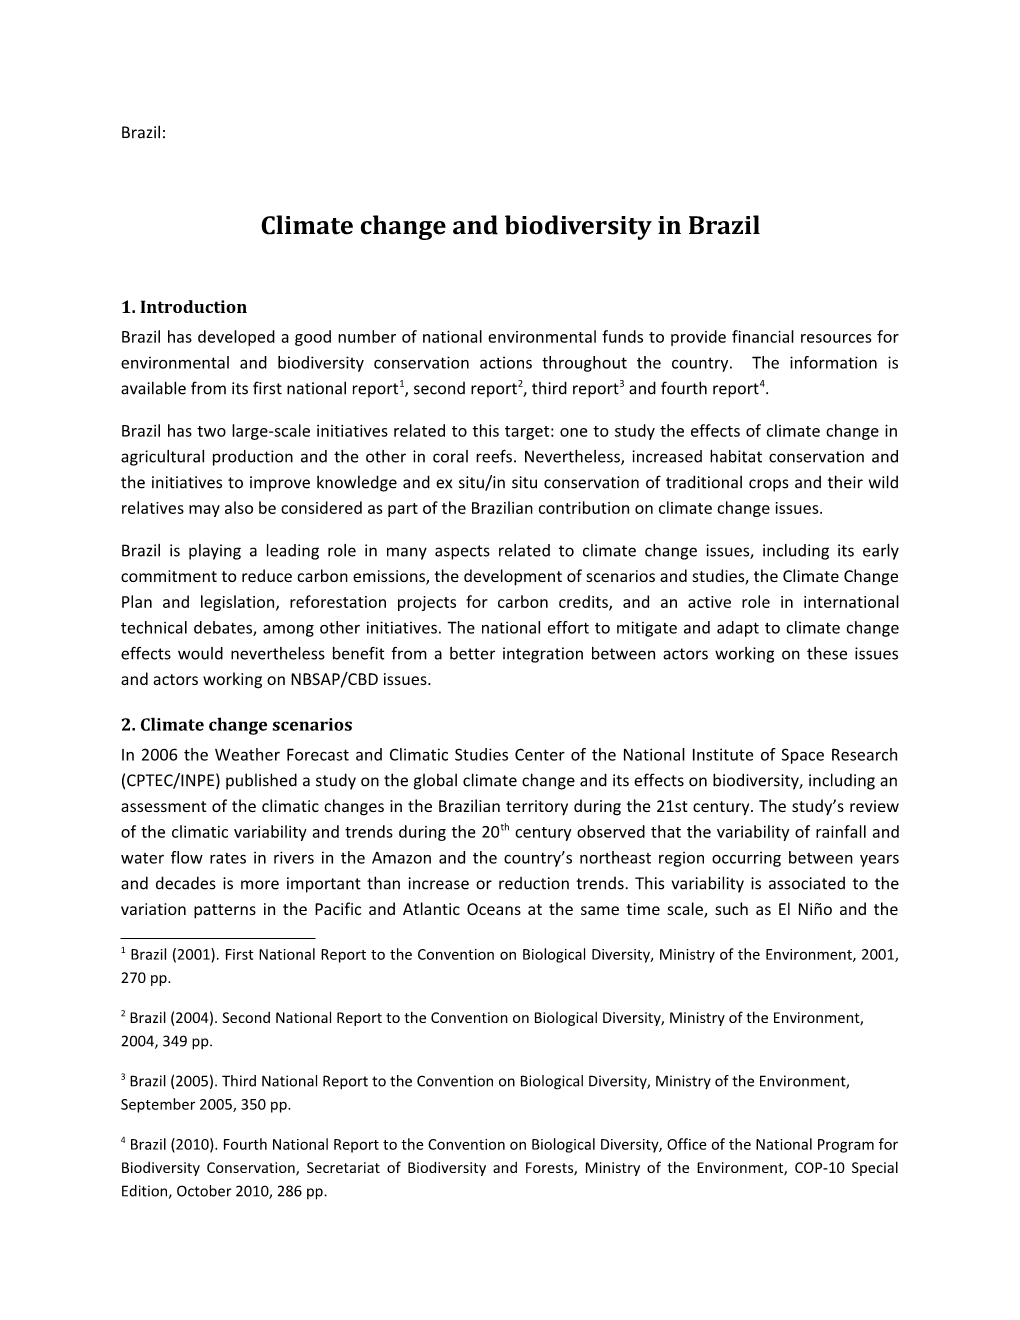 Climate Change and Biodiversity in Brazil